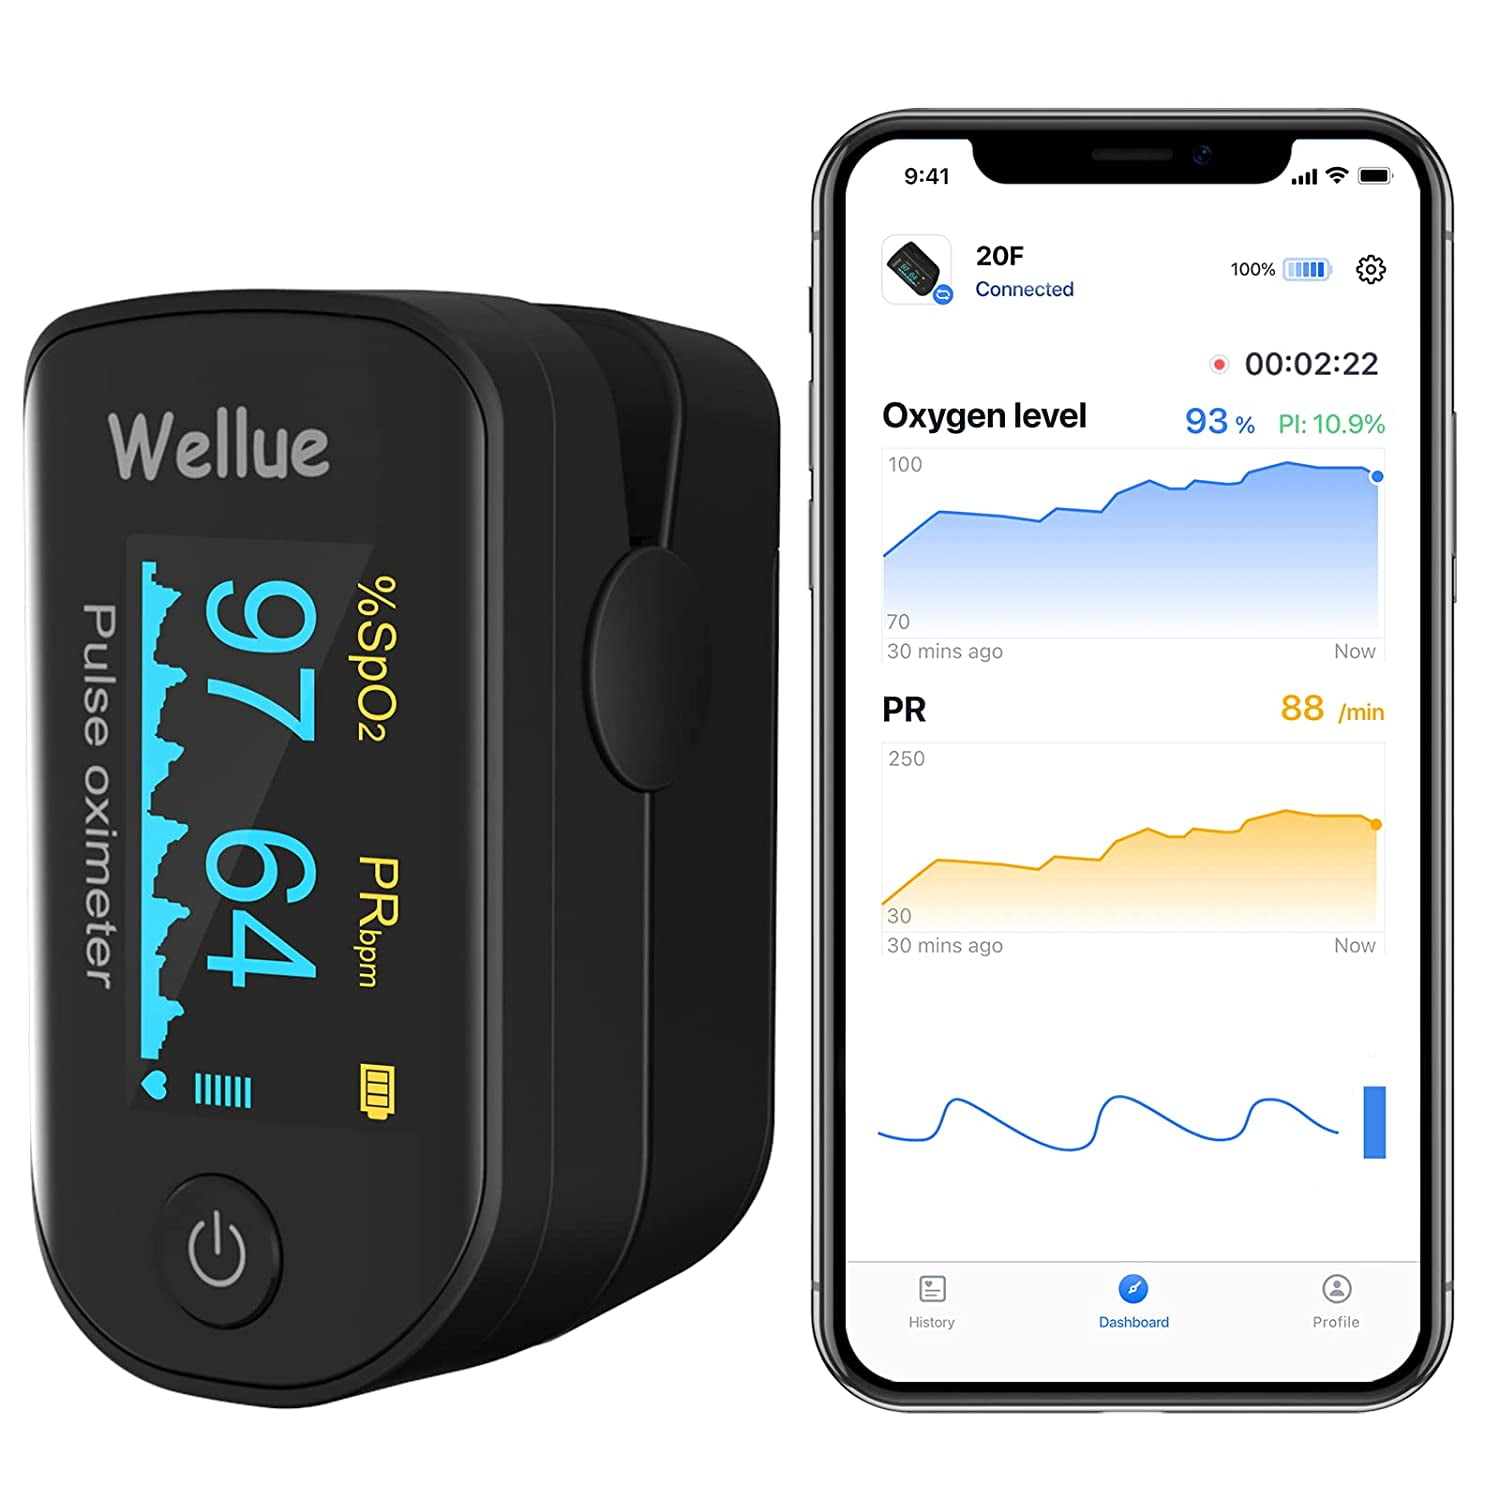 Wellue Blood Pressure Monitor with ECG (Wi-Fi and Bluetooth Sync) on Vimeo